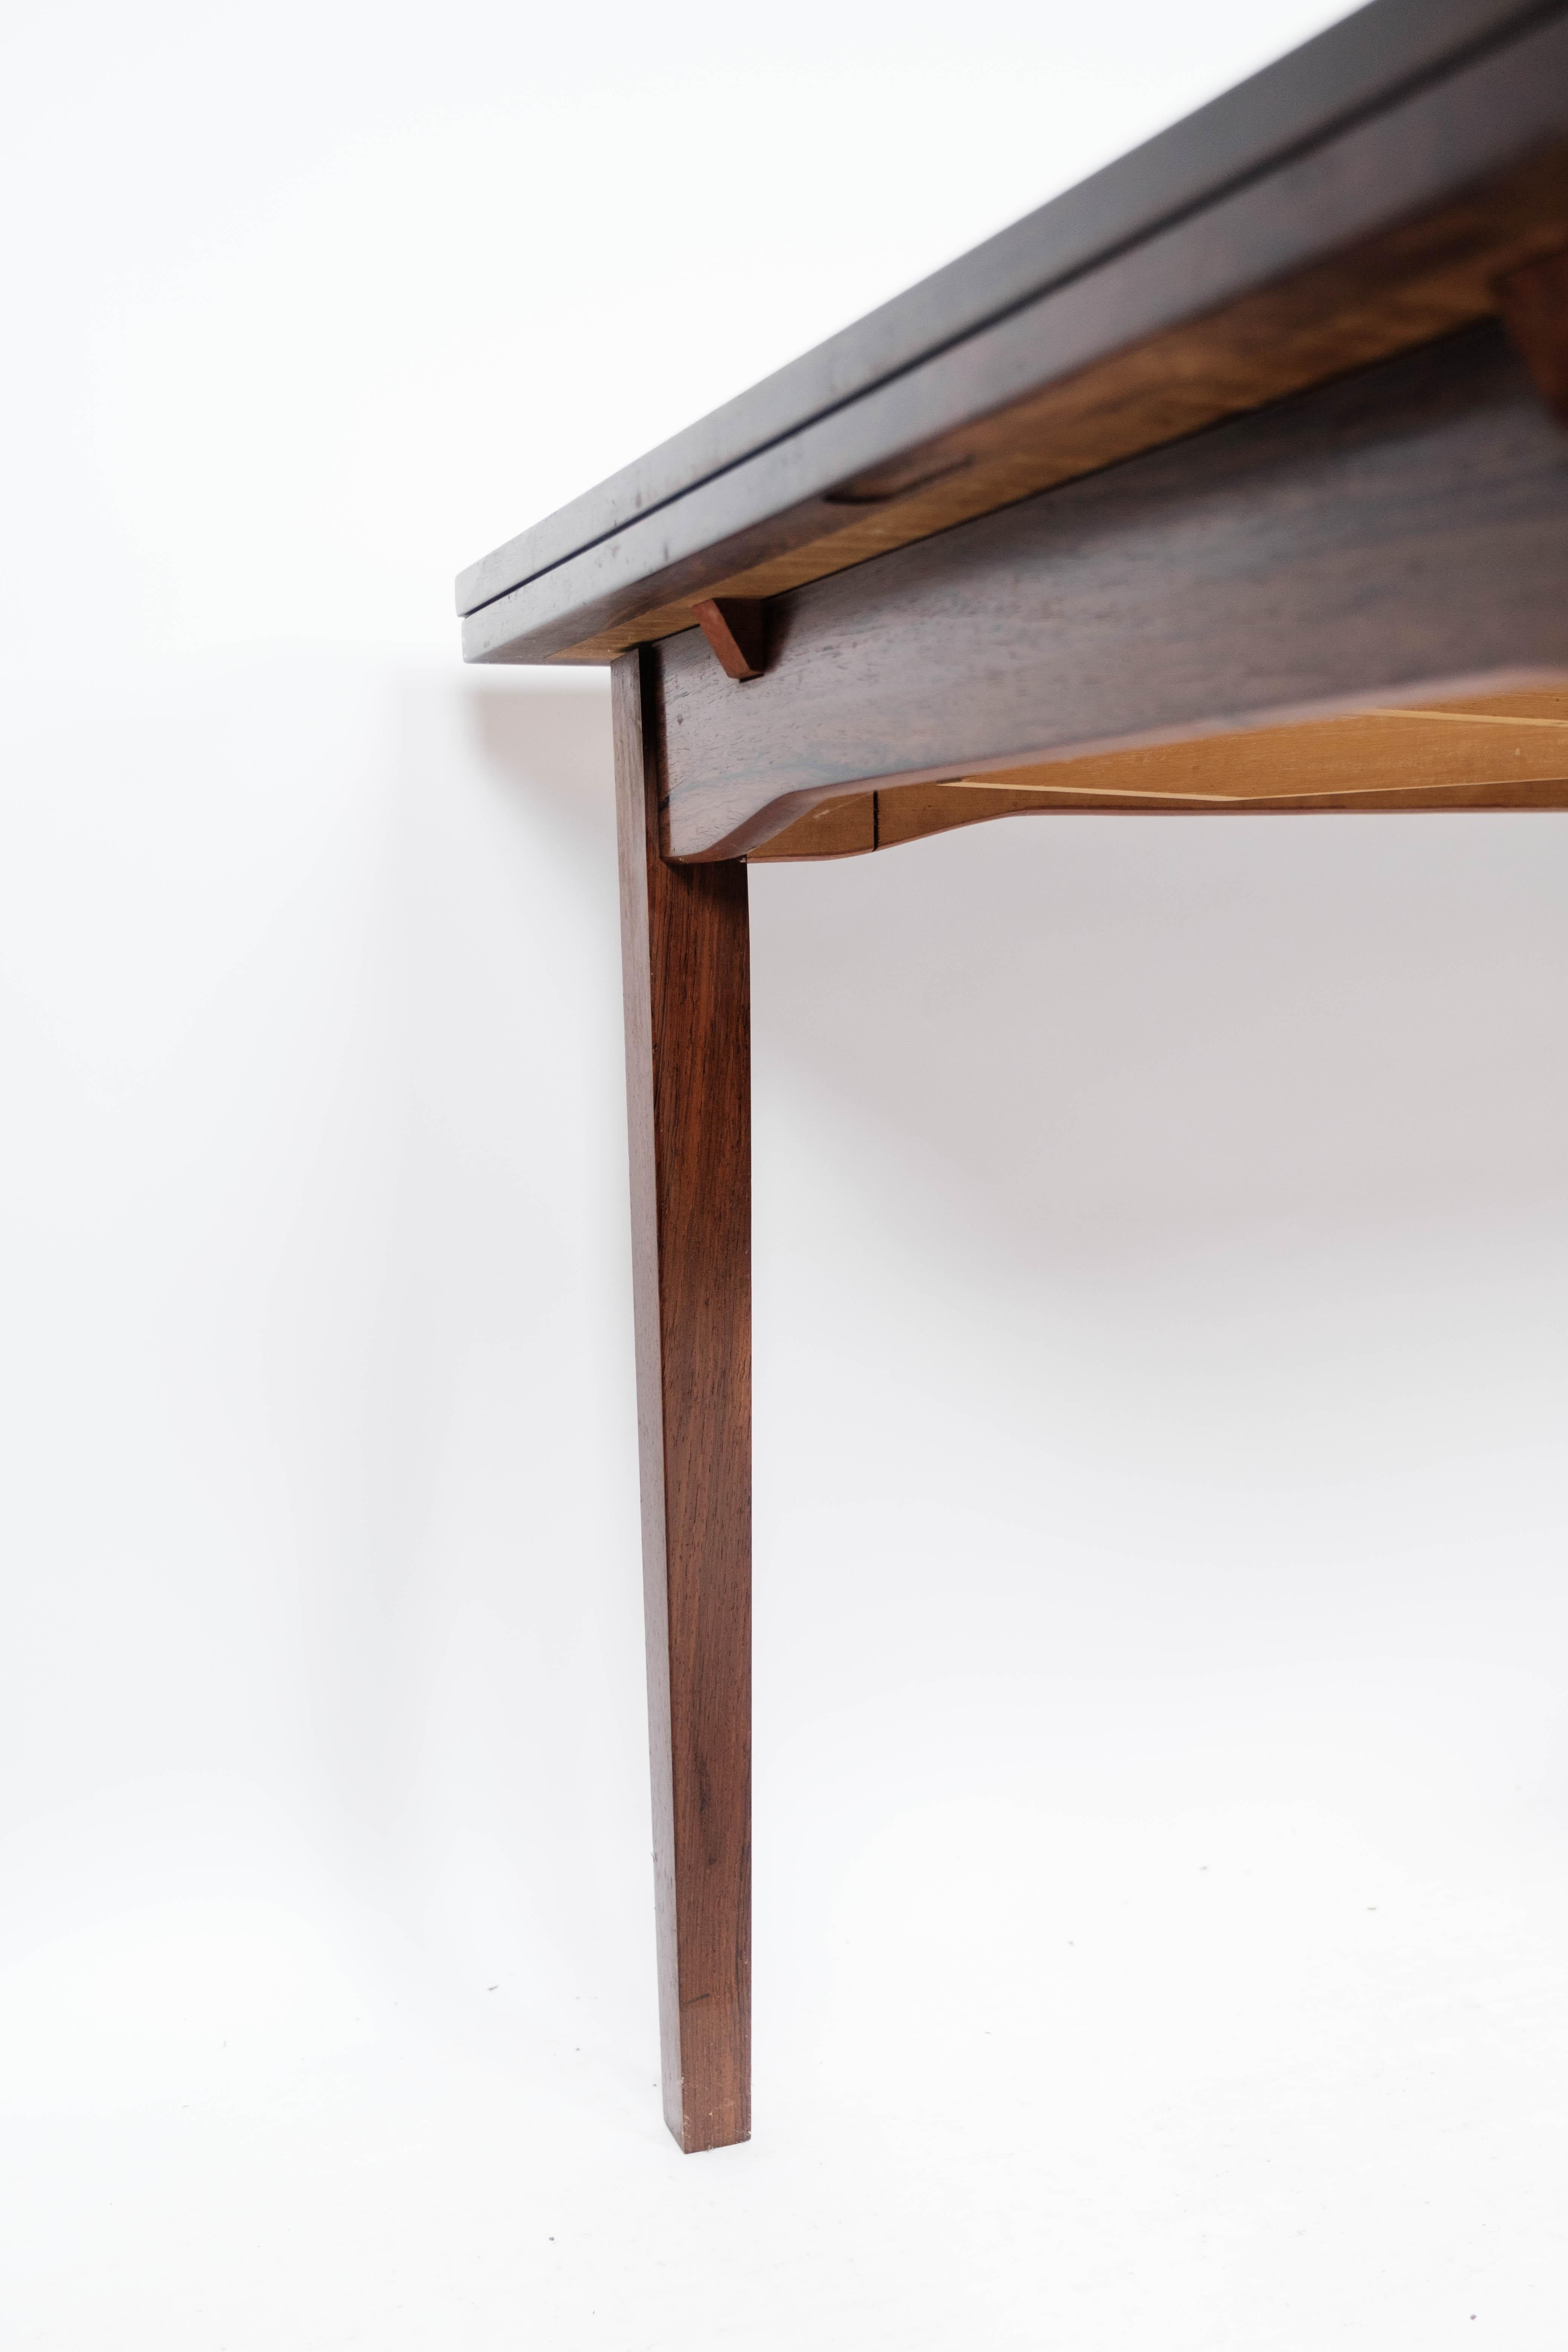 Dining Table in Rosewood with Extension, of Danish Design by Ellegaard, 1960s For Sale 1